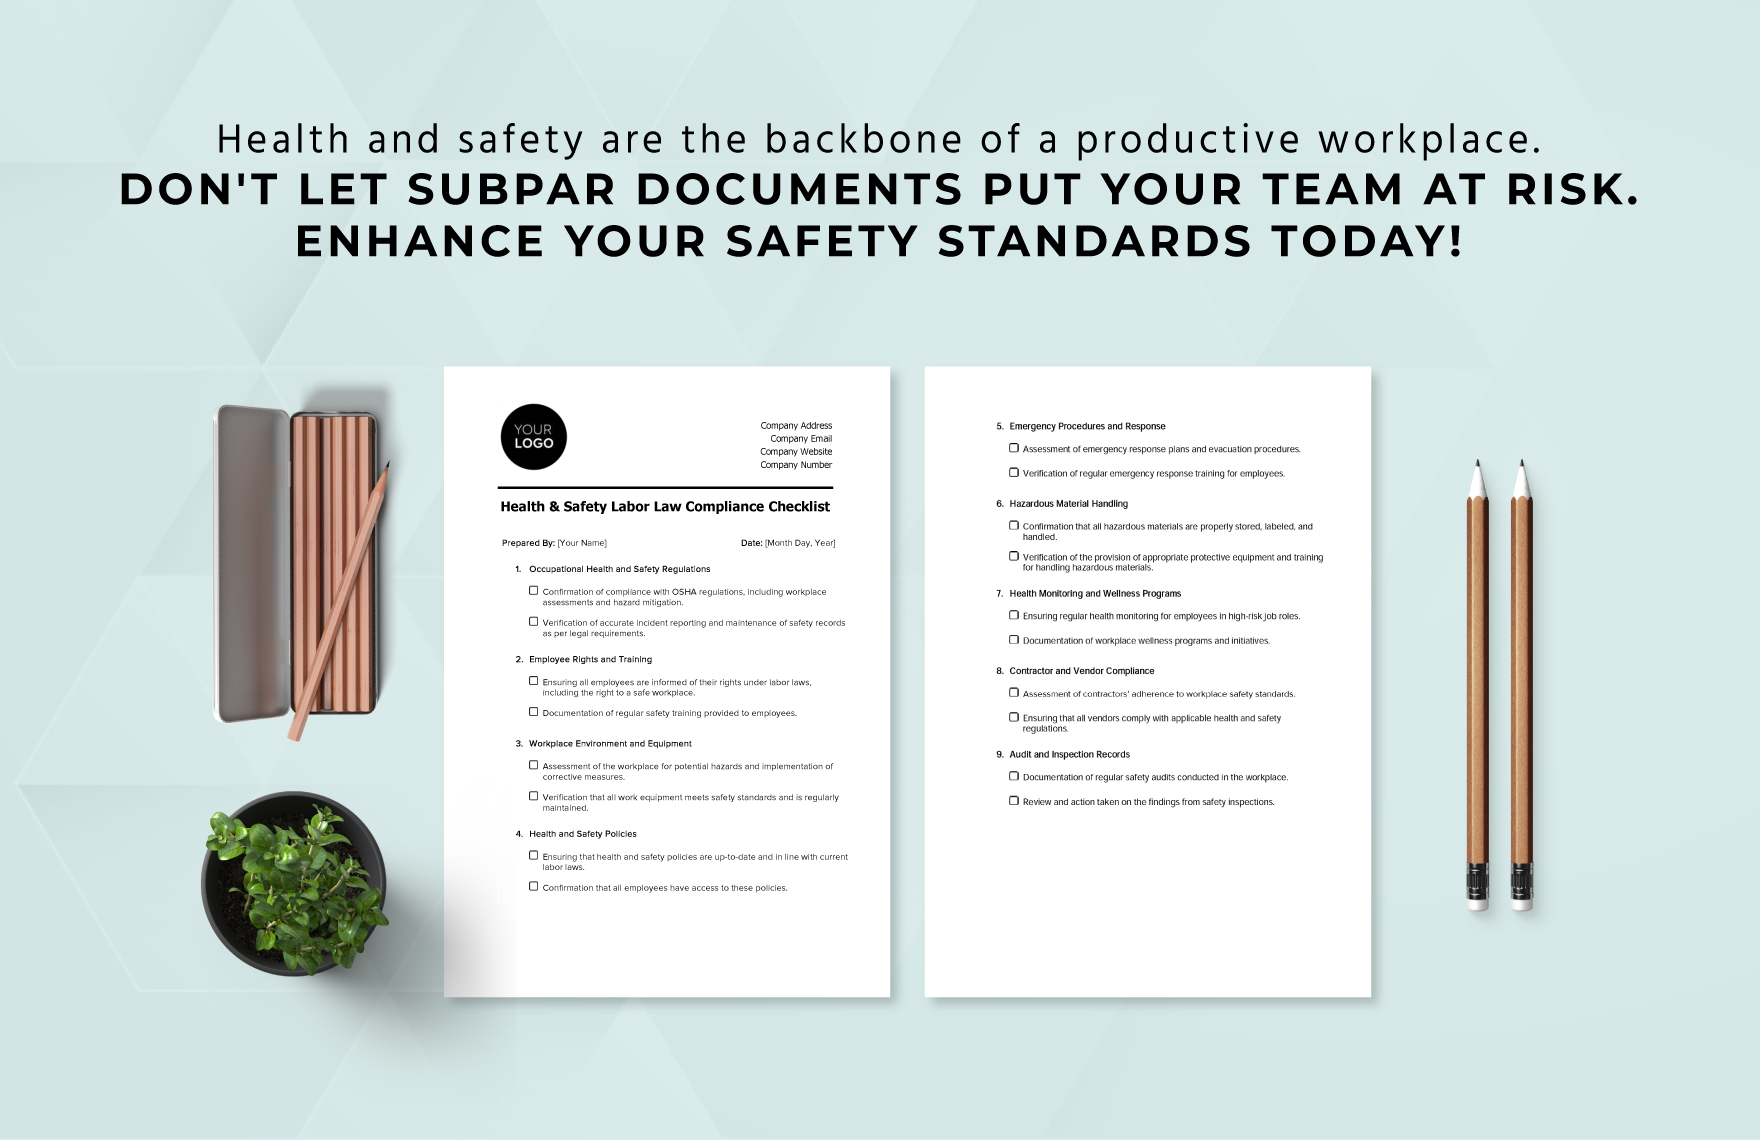 Health & Safety Labor Law Compliance Checklist Template